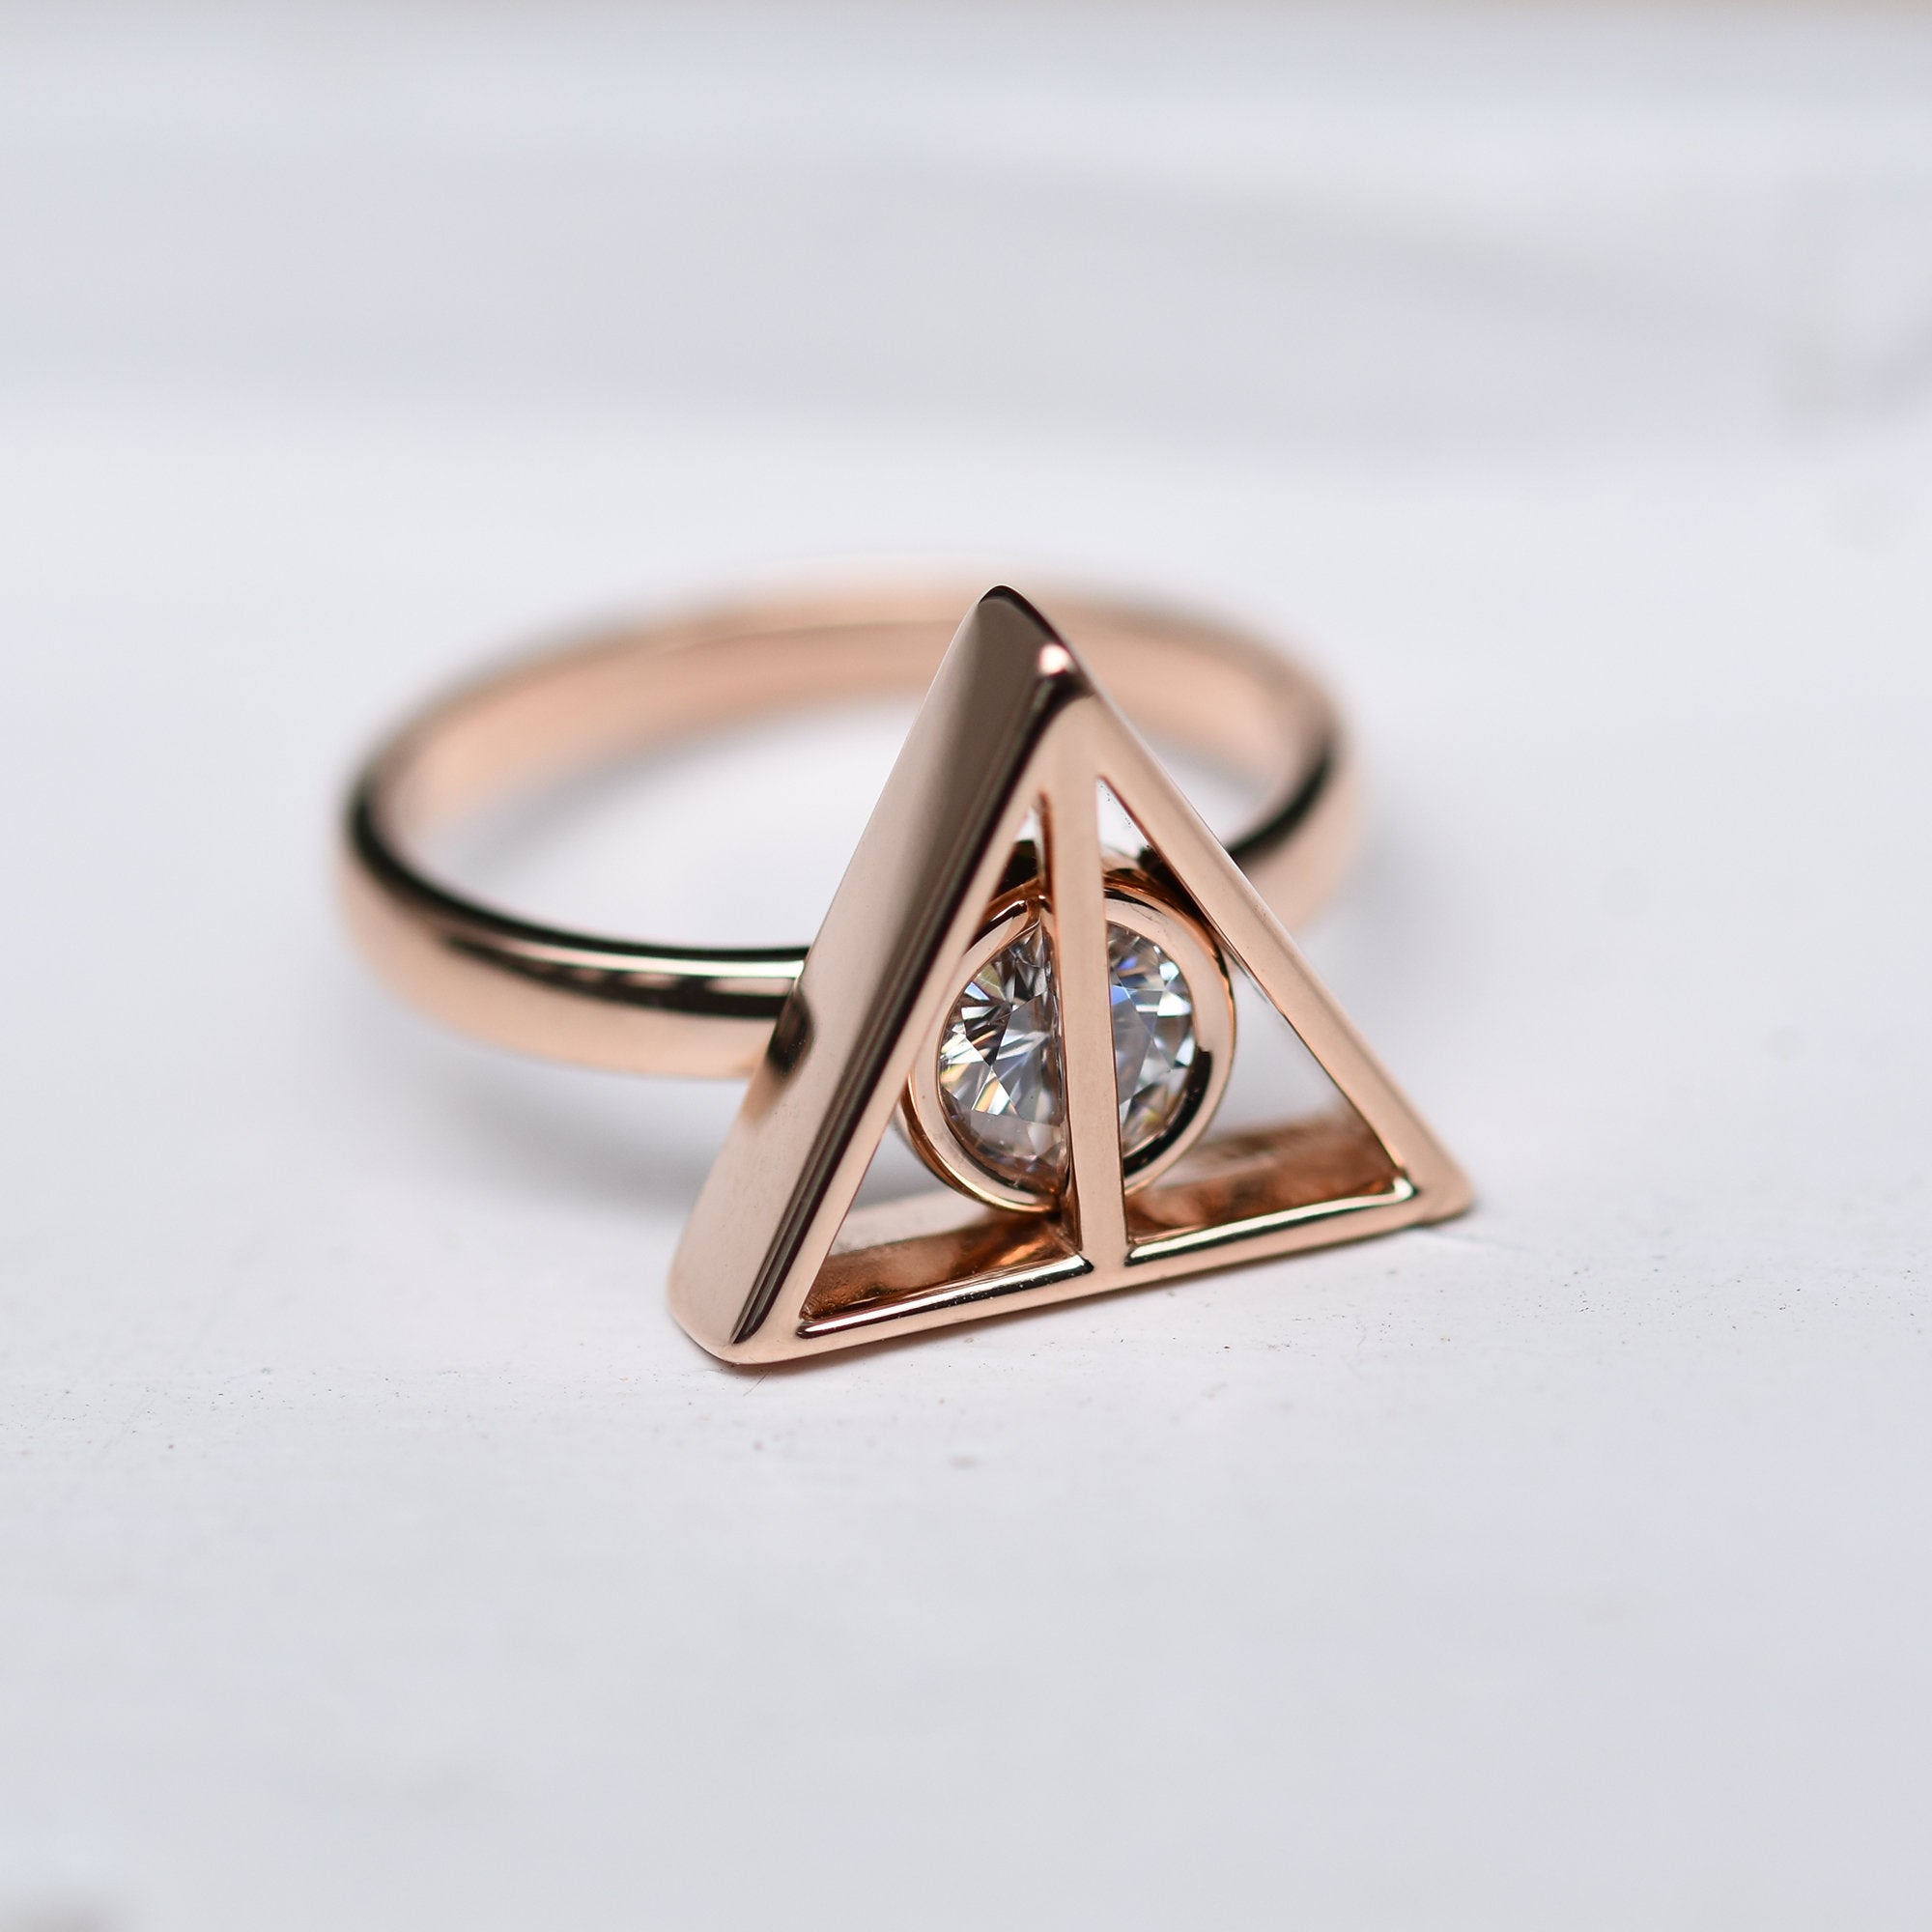 These Harry Potter Engagement Rings and Wedding Bands Are